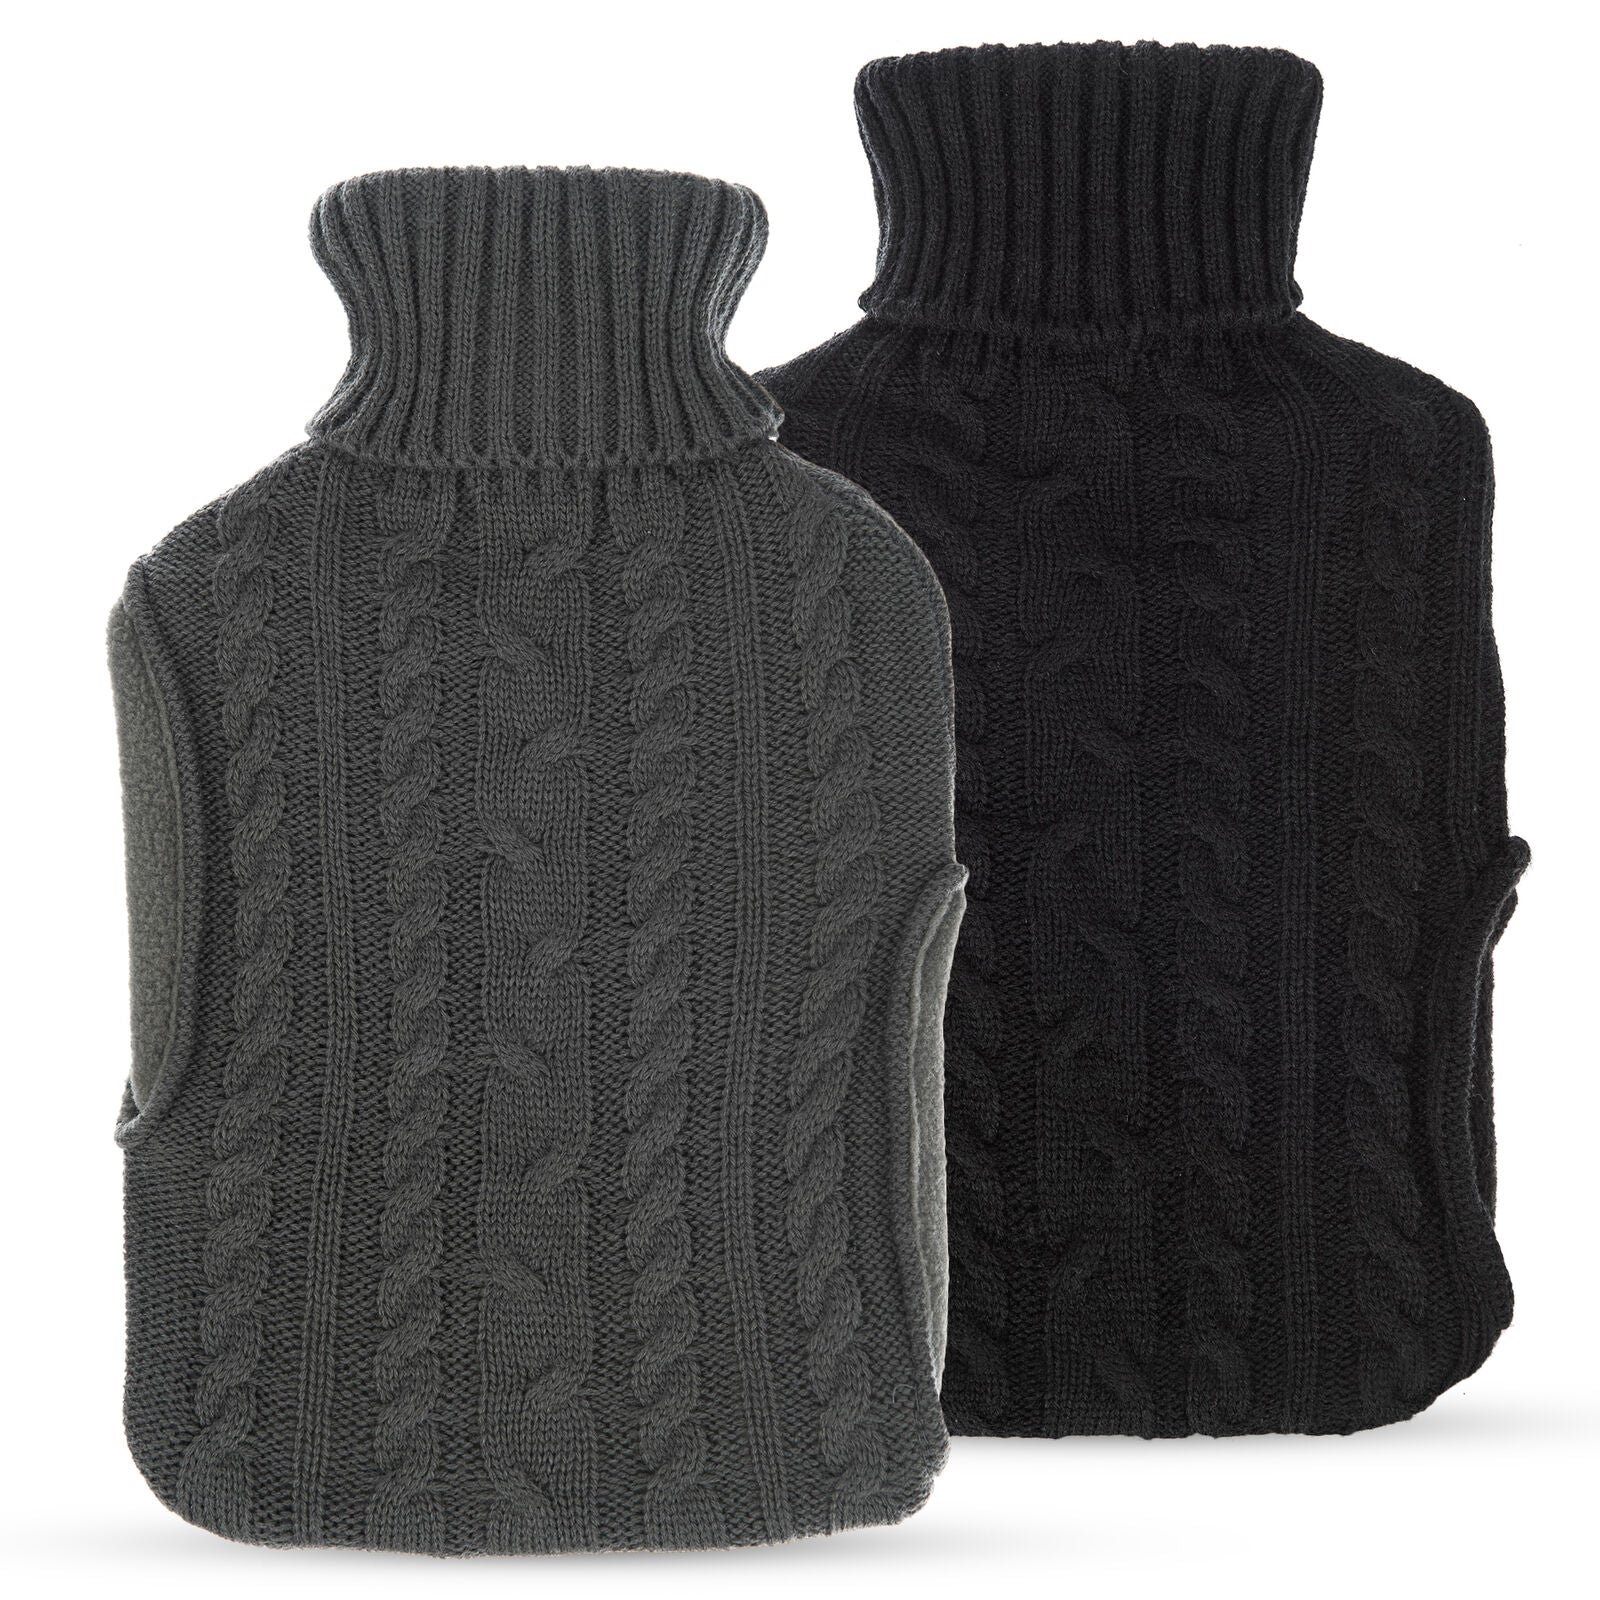 Hot Water Bottle With Knitted Soft Cozy Bag Cover